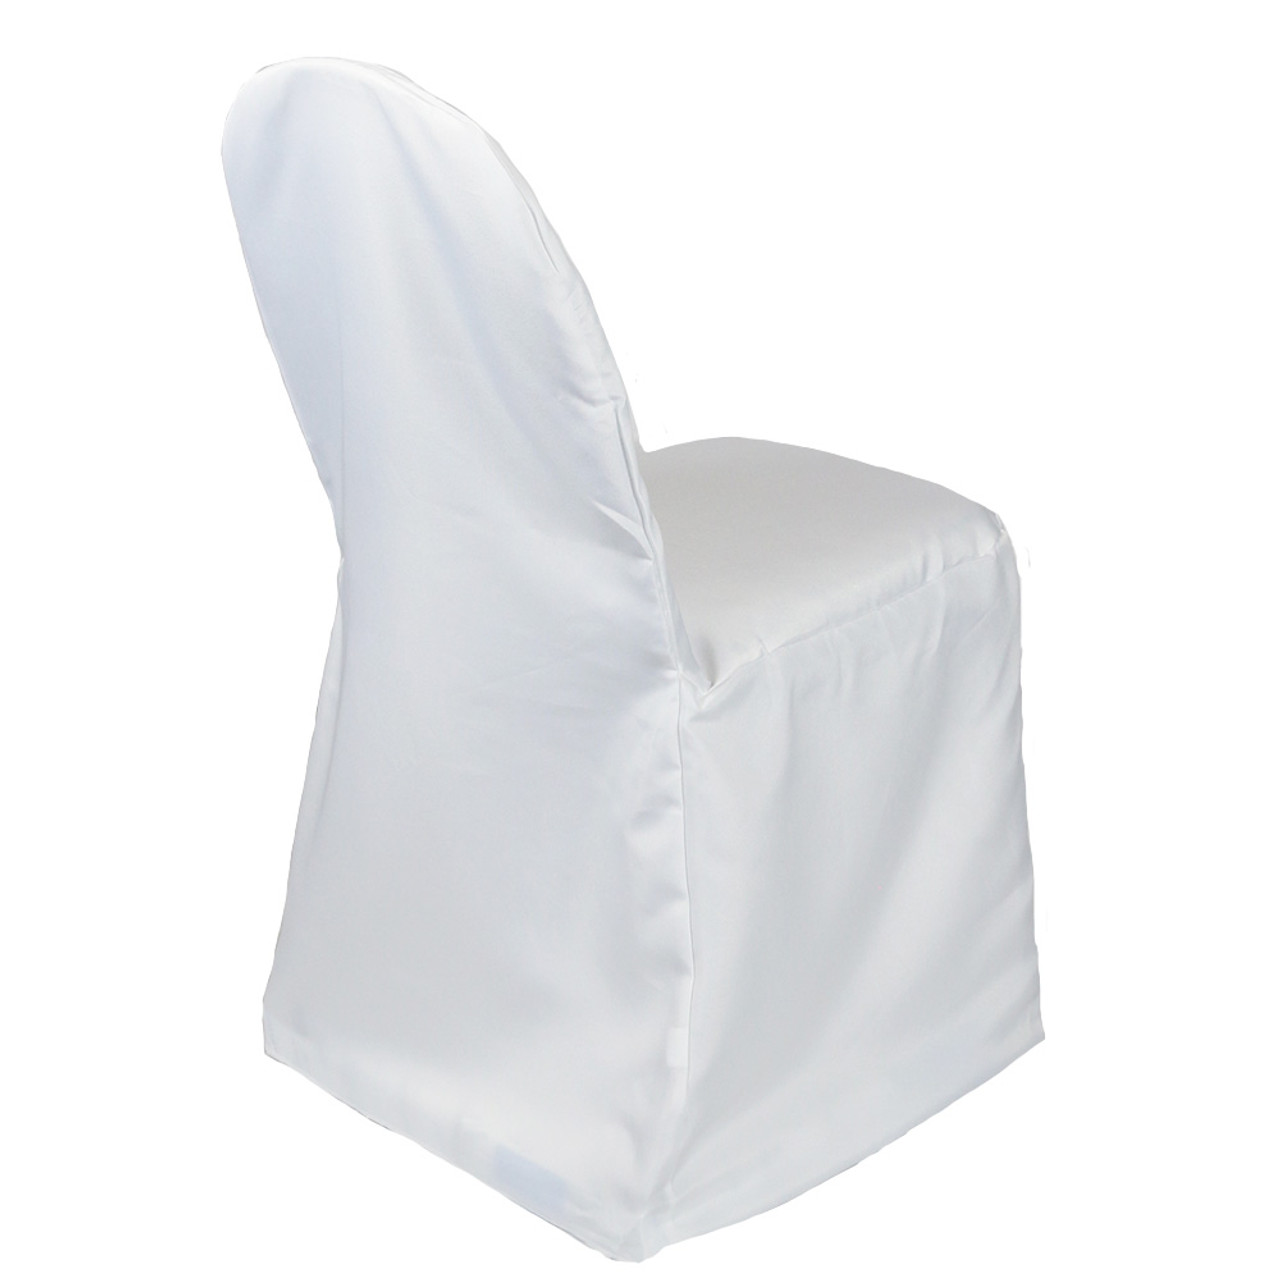 Polyester Banquet Chair Cover White - Your Chair Covers Inc.